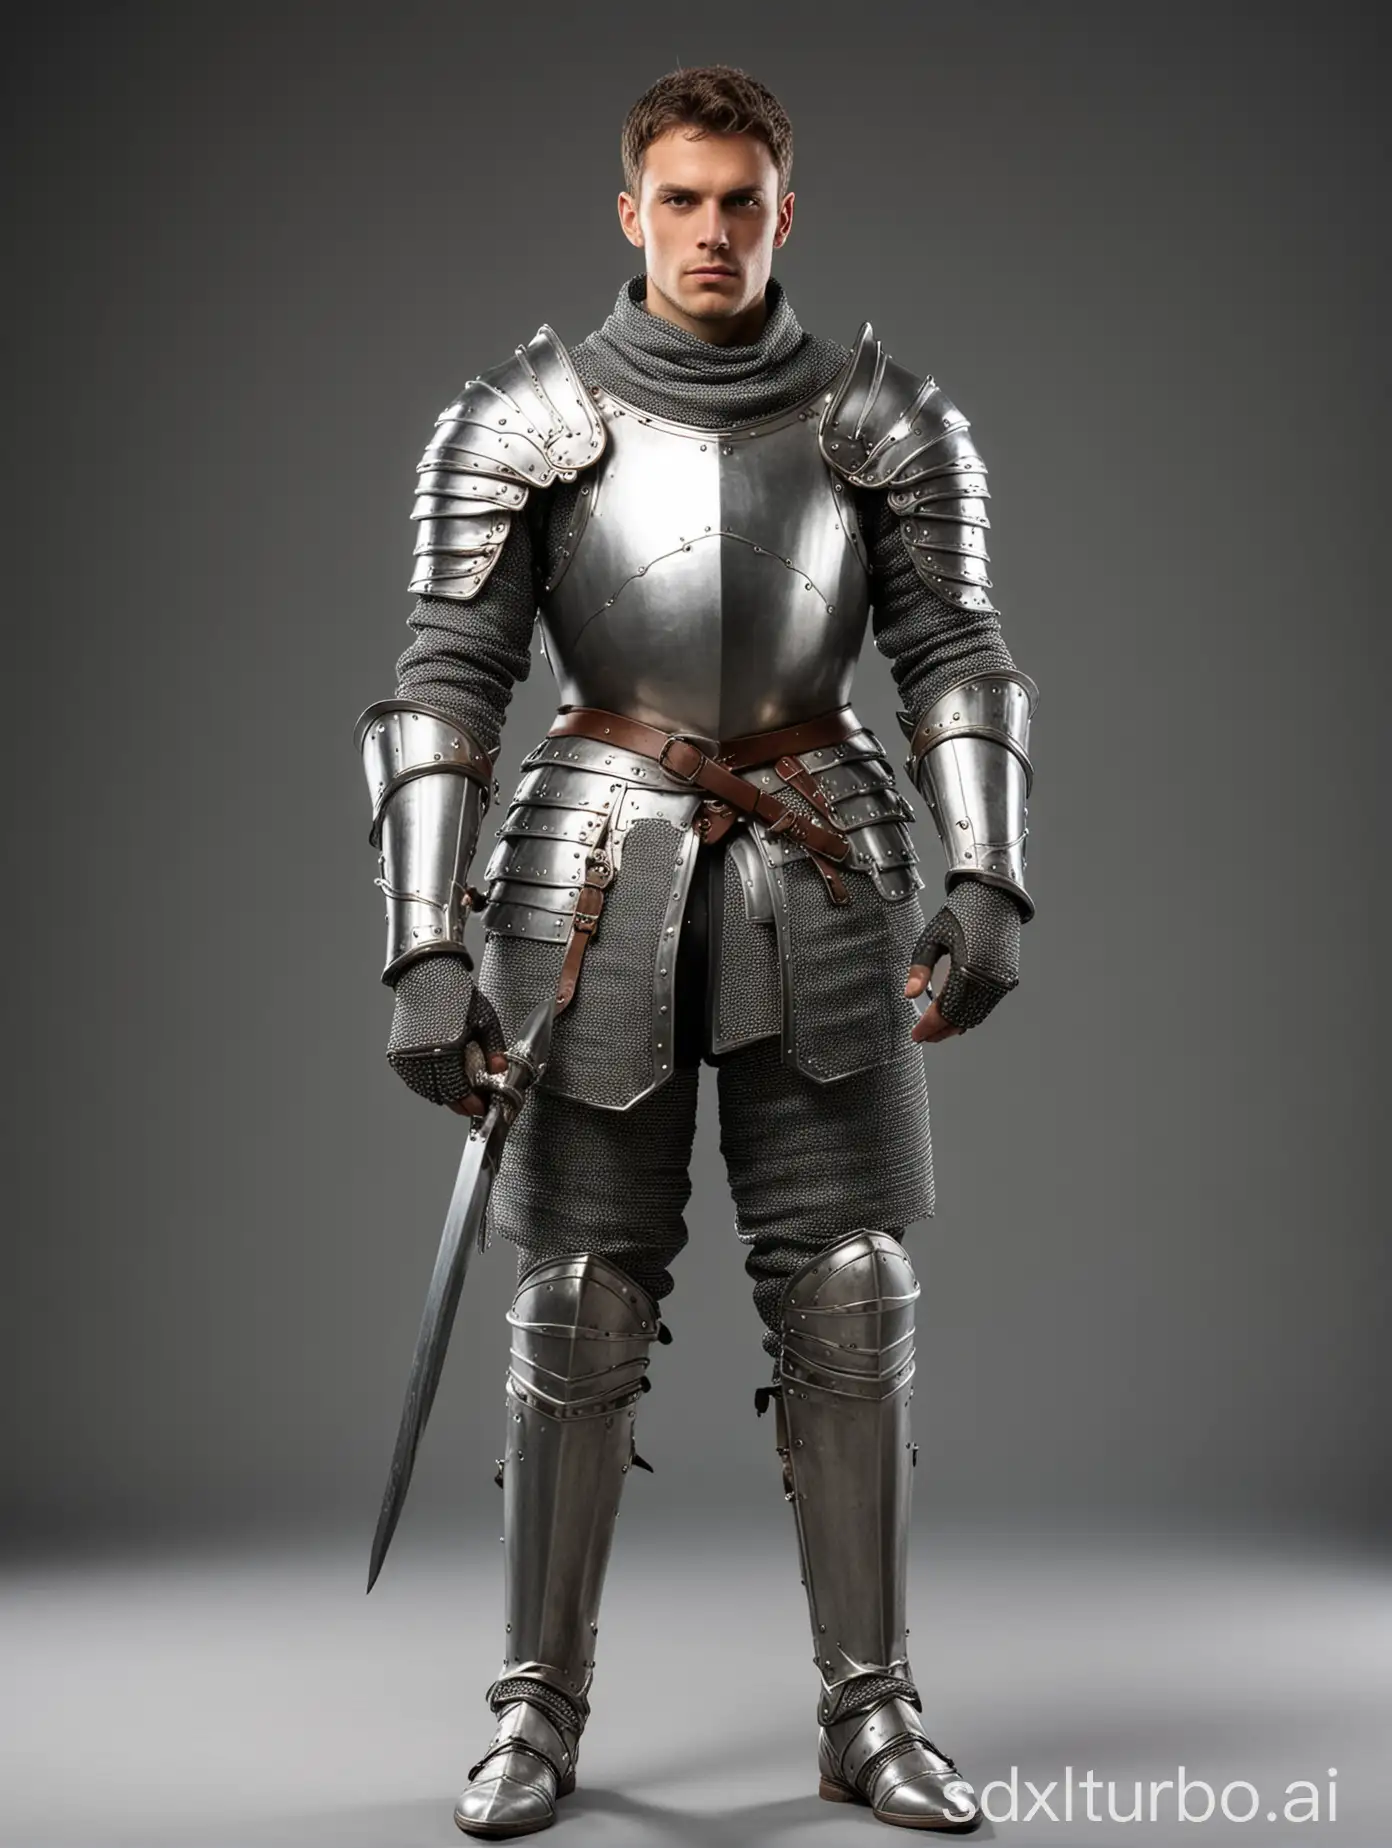 Medieval knight, full body shot, wearing silver armor.